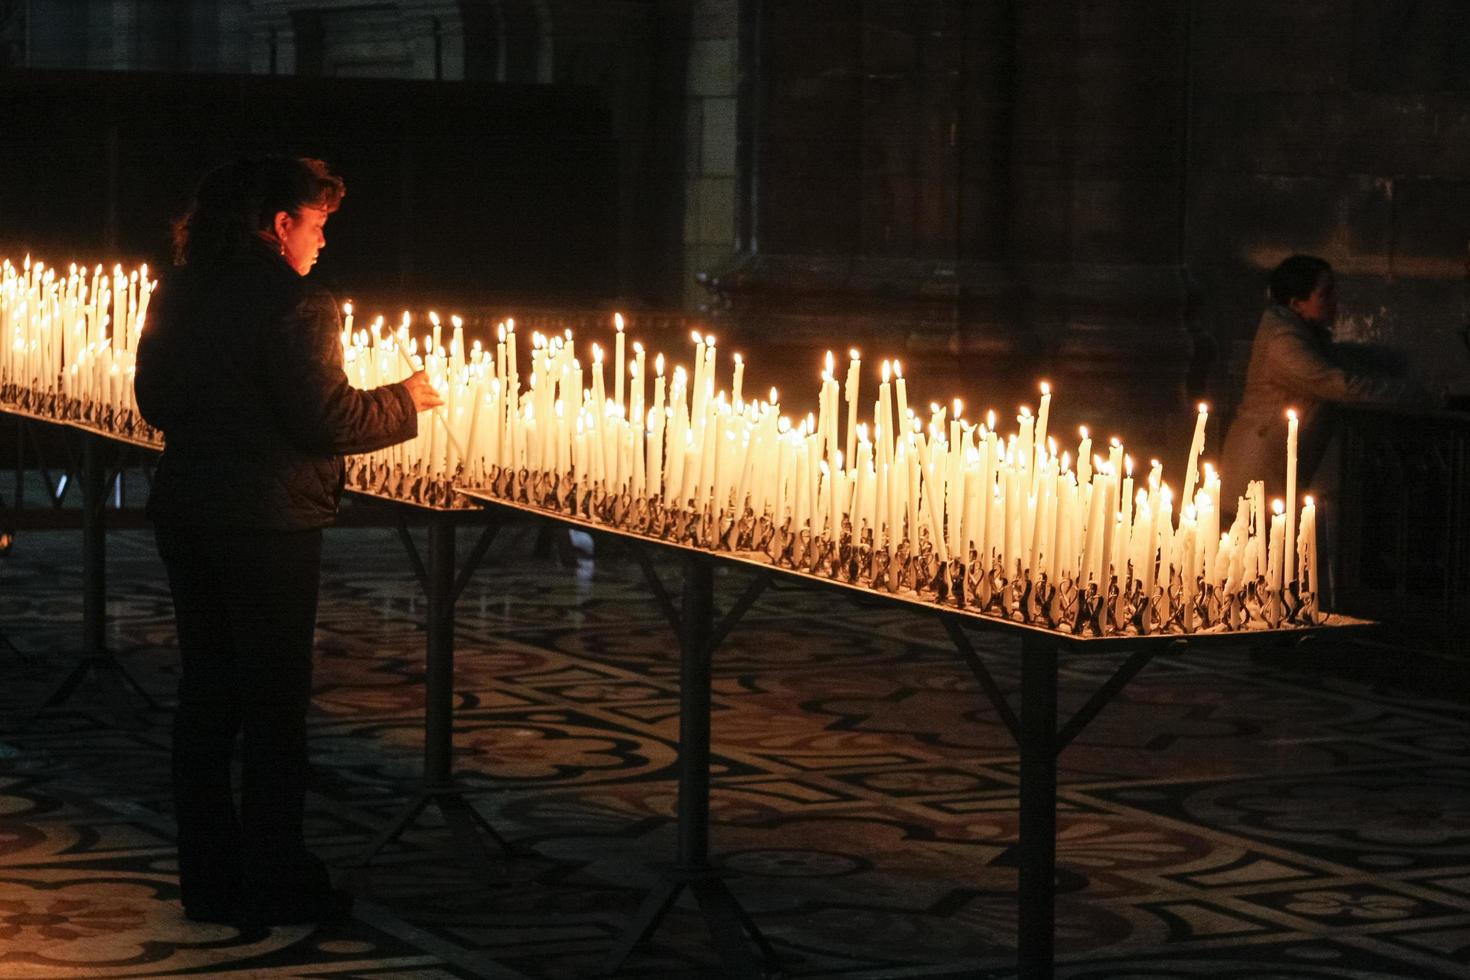 Burning candles in the Duomo Cathedral in Milan Italy on February 23, 2008. Two unidentified people photo